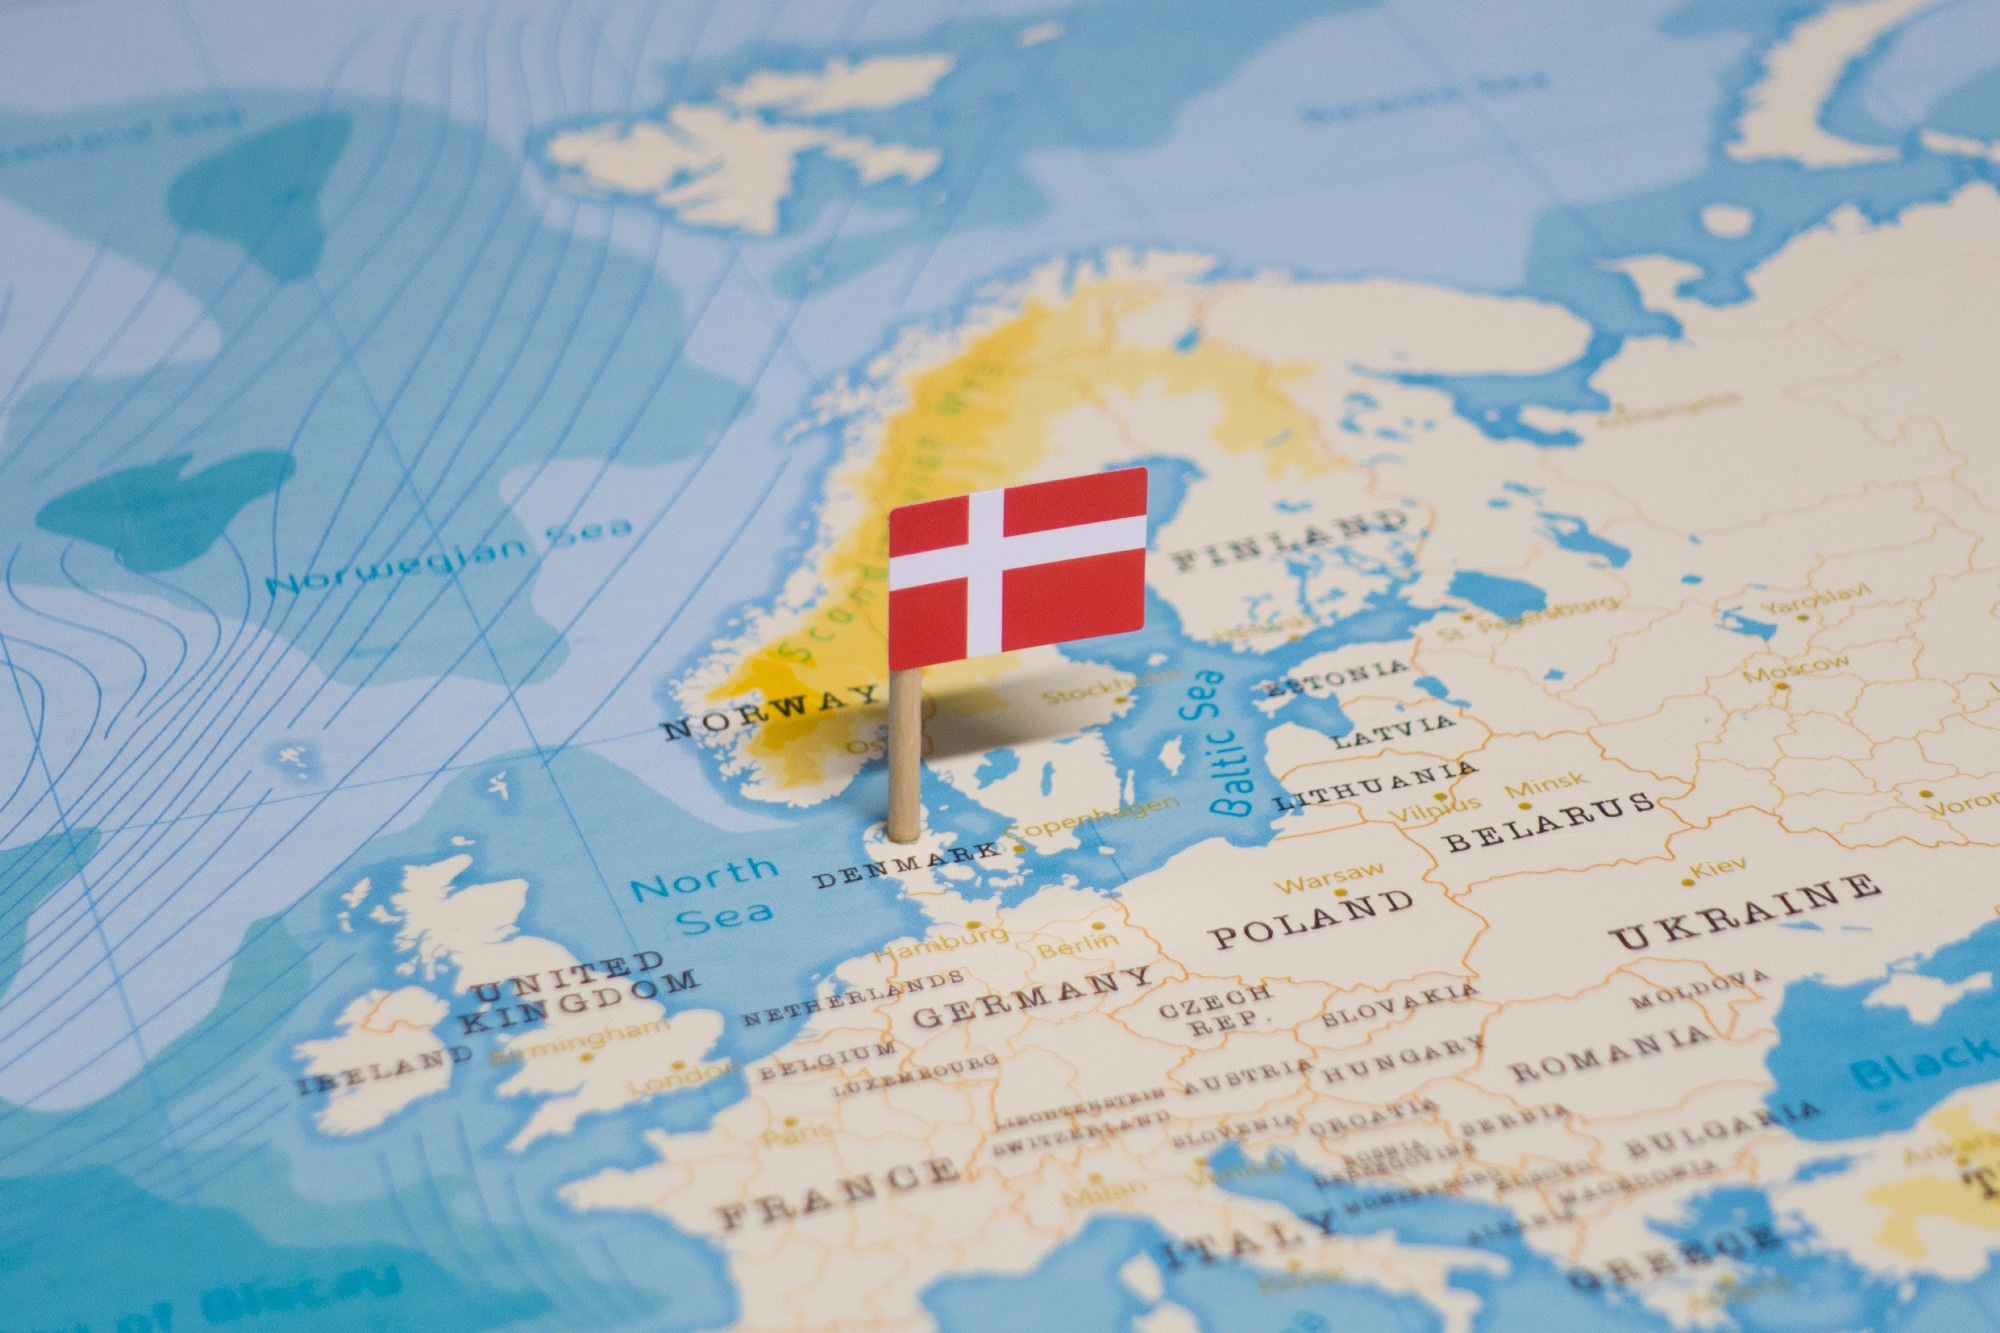 Study: Risk of reinfection, vaccine protection, and severity of infection with the BA.5 omicron subvariant: a nation-wide population-based study in Denmark. Image Credit: hyotographics/Shutterstock